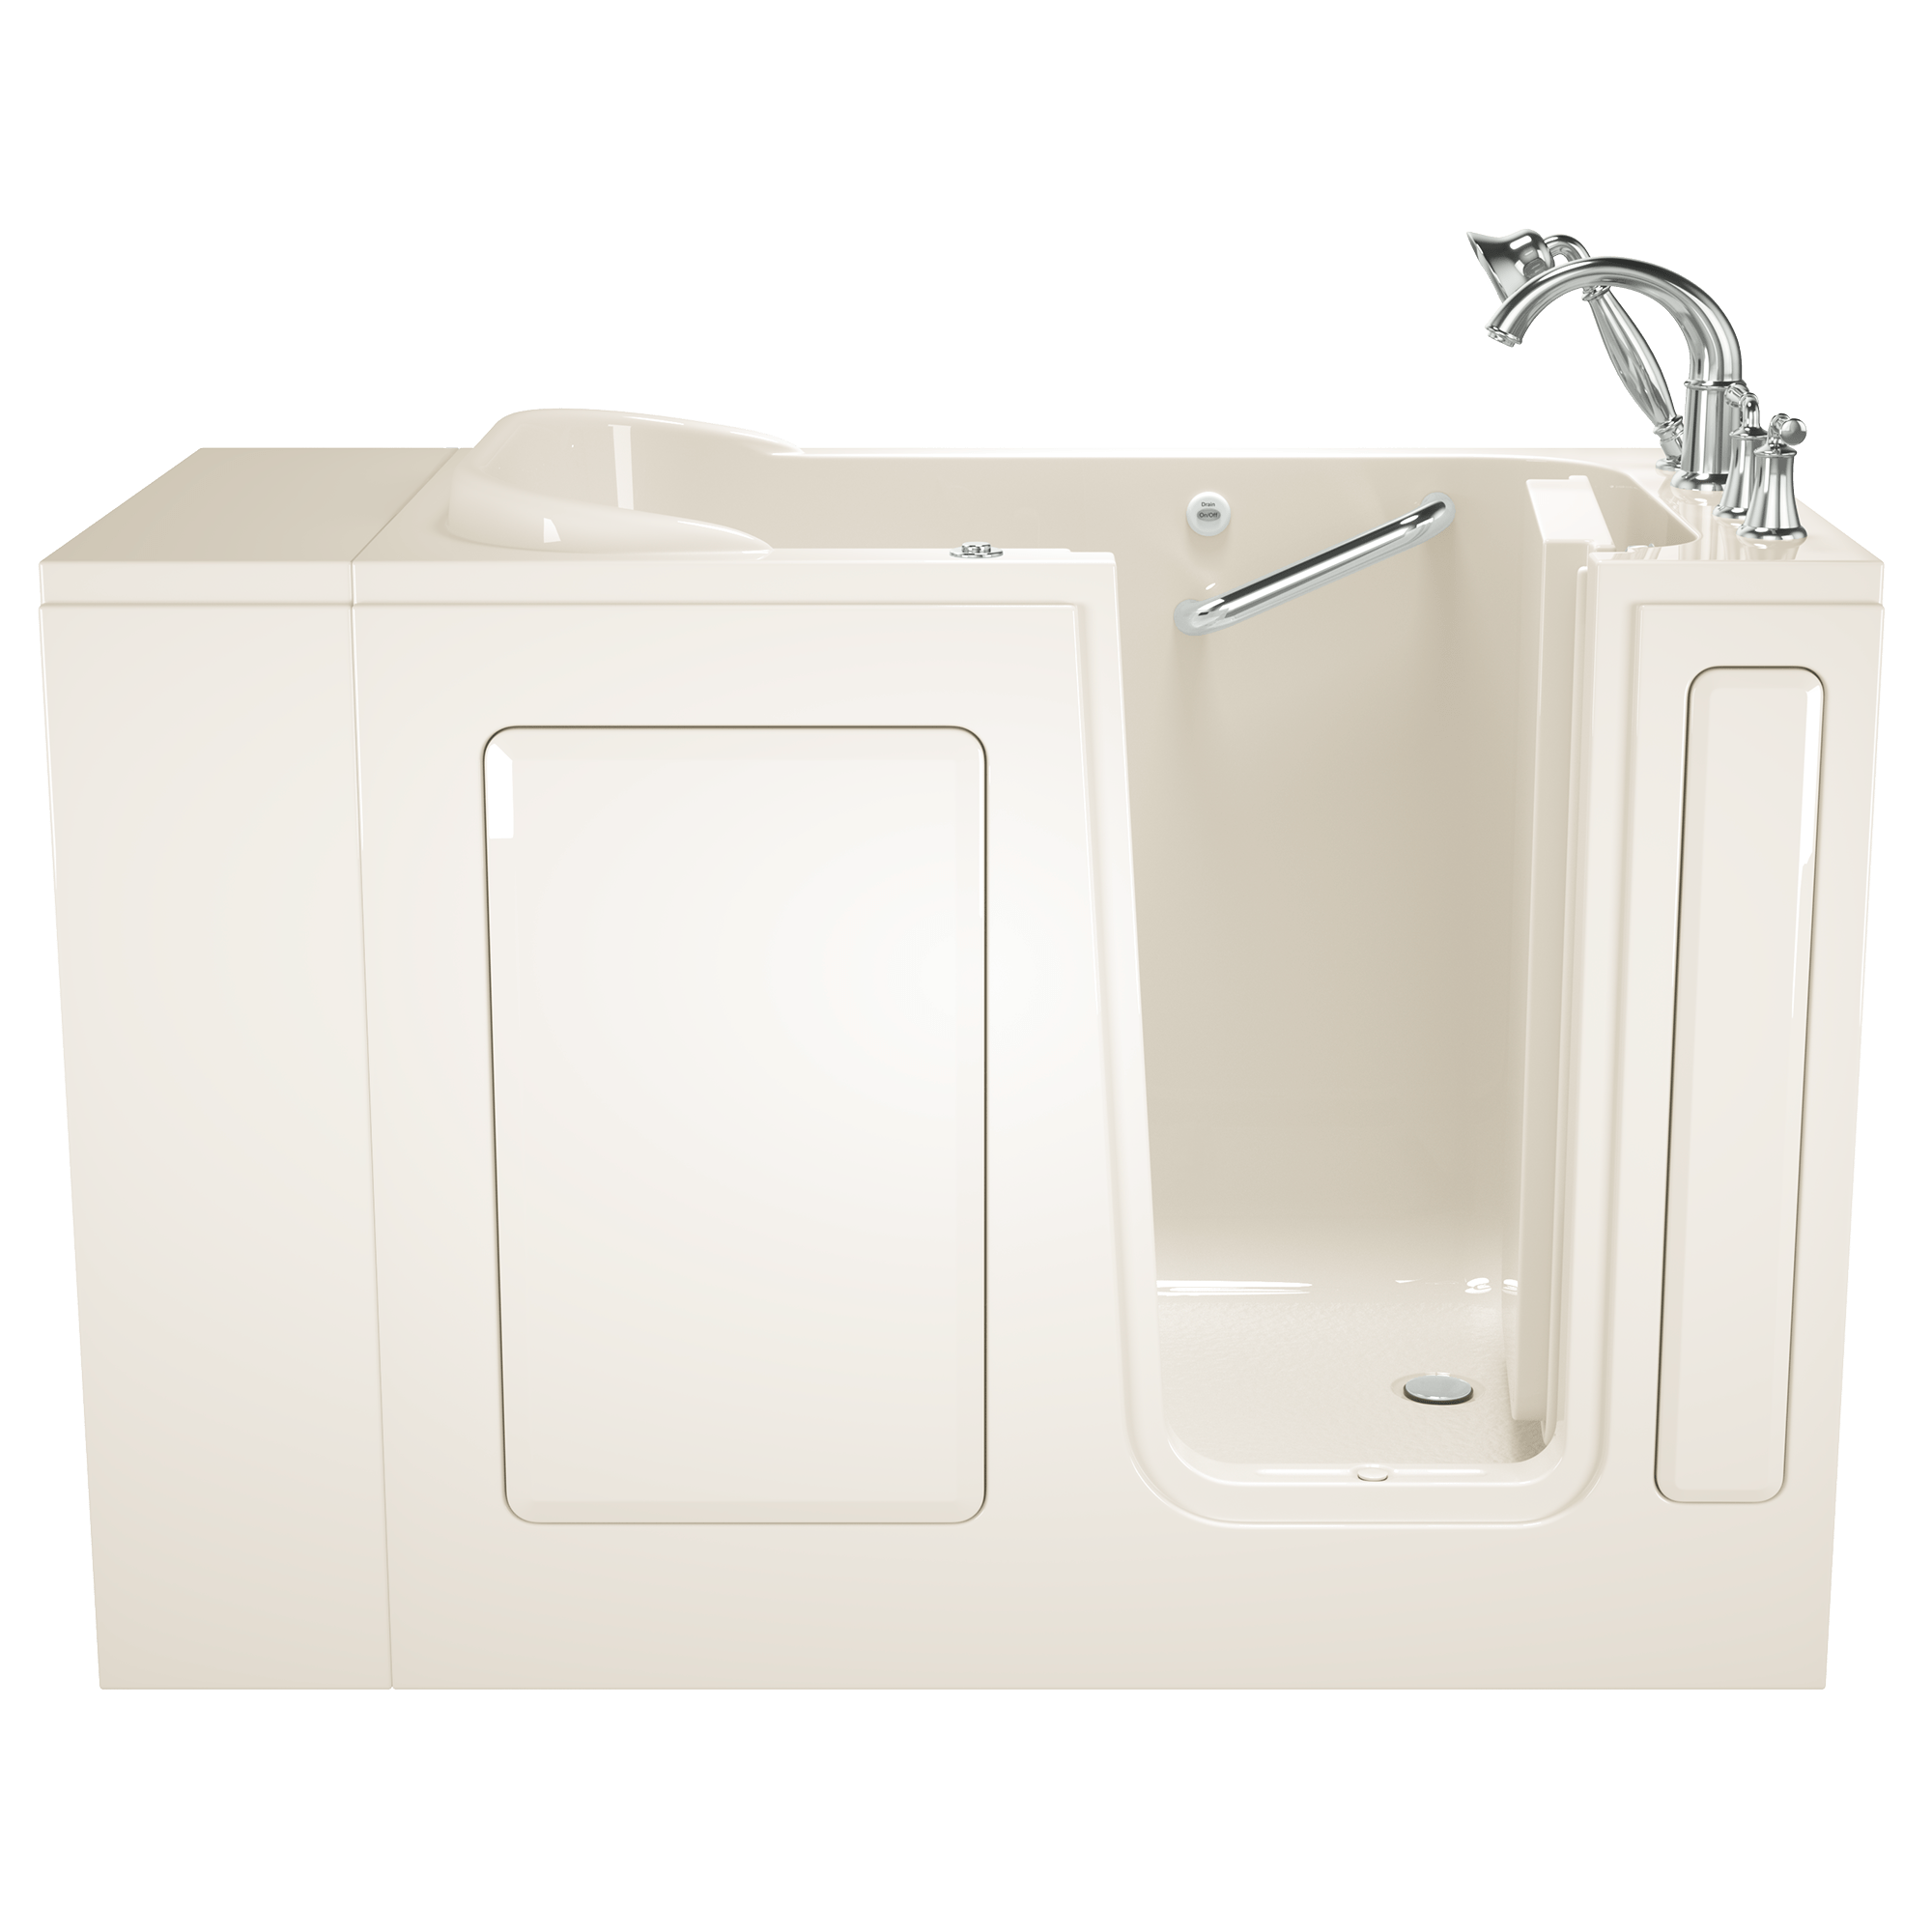 Gelcoat Value Series 28x48-Inch Walk-In Bathtub with Air Spa System  Right Hand Door and Drain